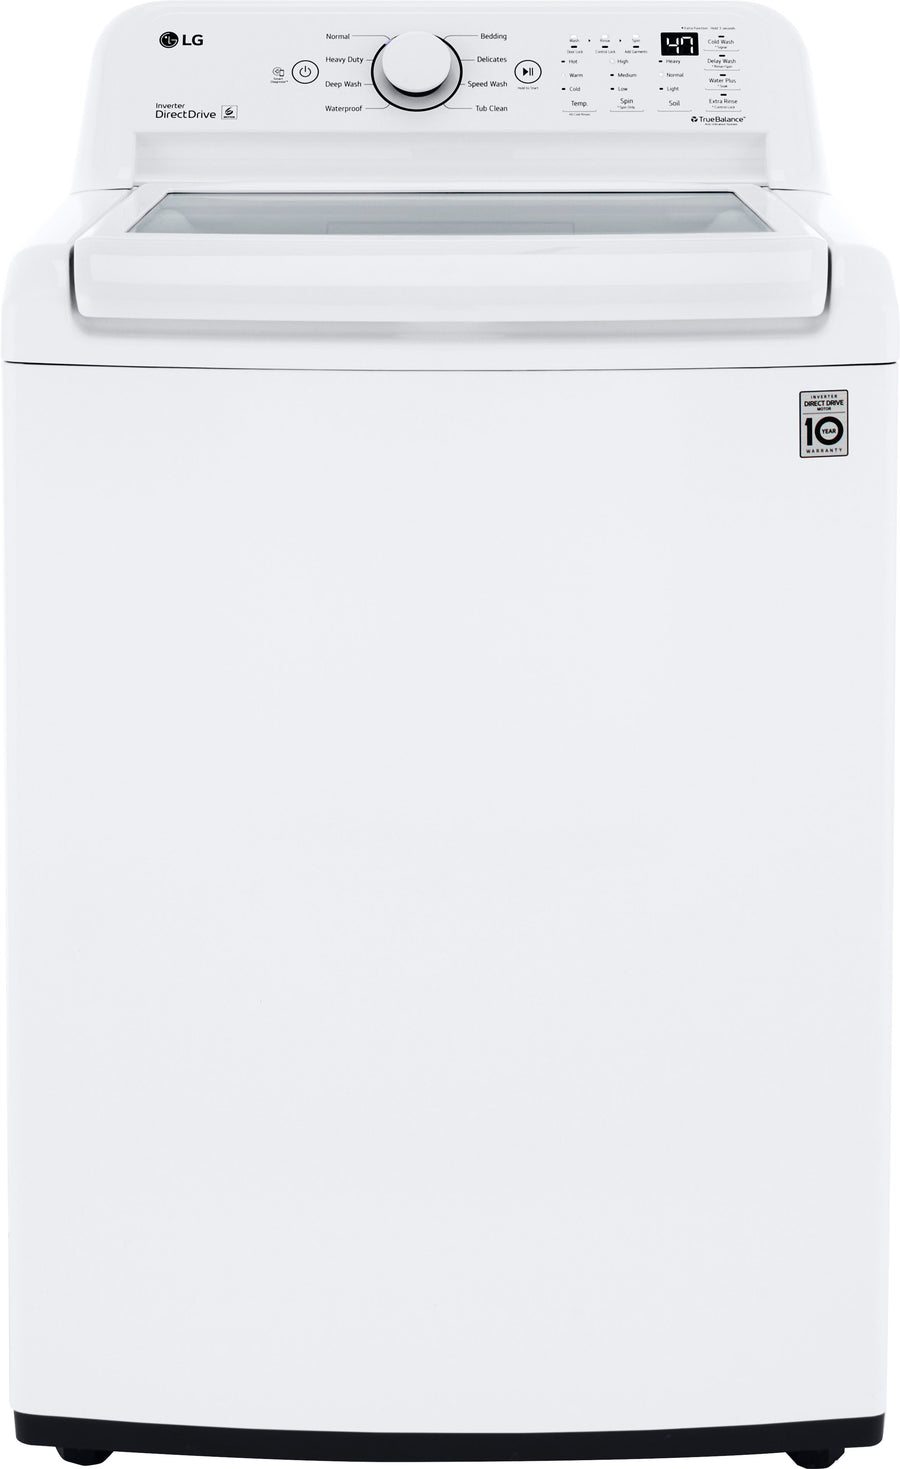 LG - 4.5 Cu. Ft. Smart Top Load Washer with Vibration Reduction and TurboDrum Technology - White_0